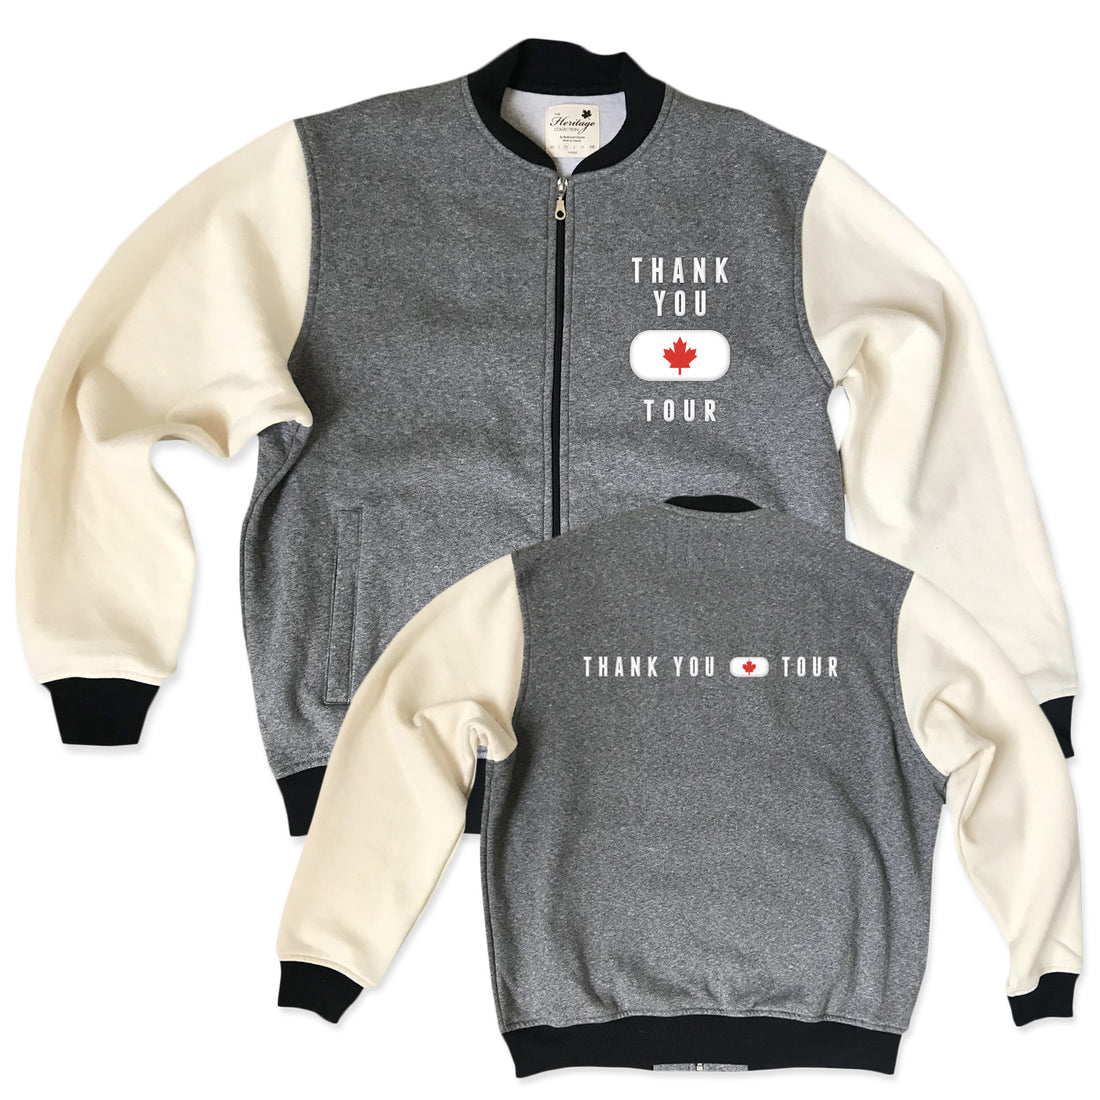 Thank You Canada Tour - Official Varsity Jacket - Salt and Pepper